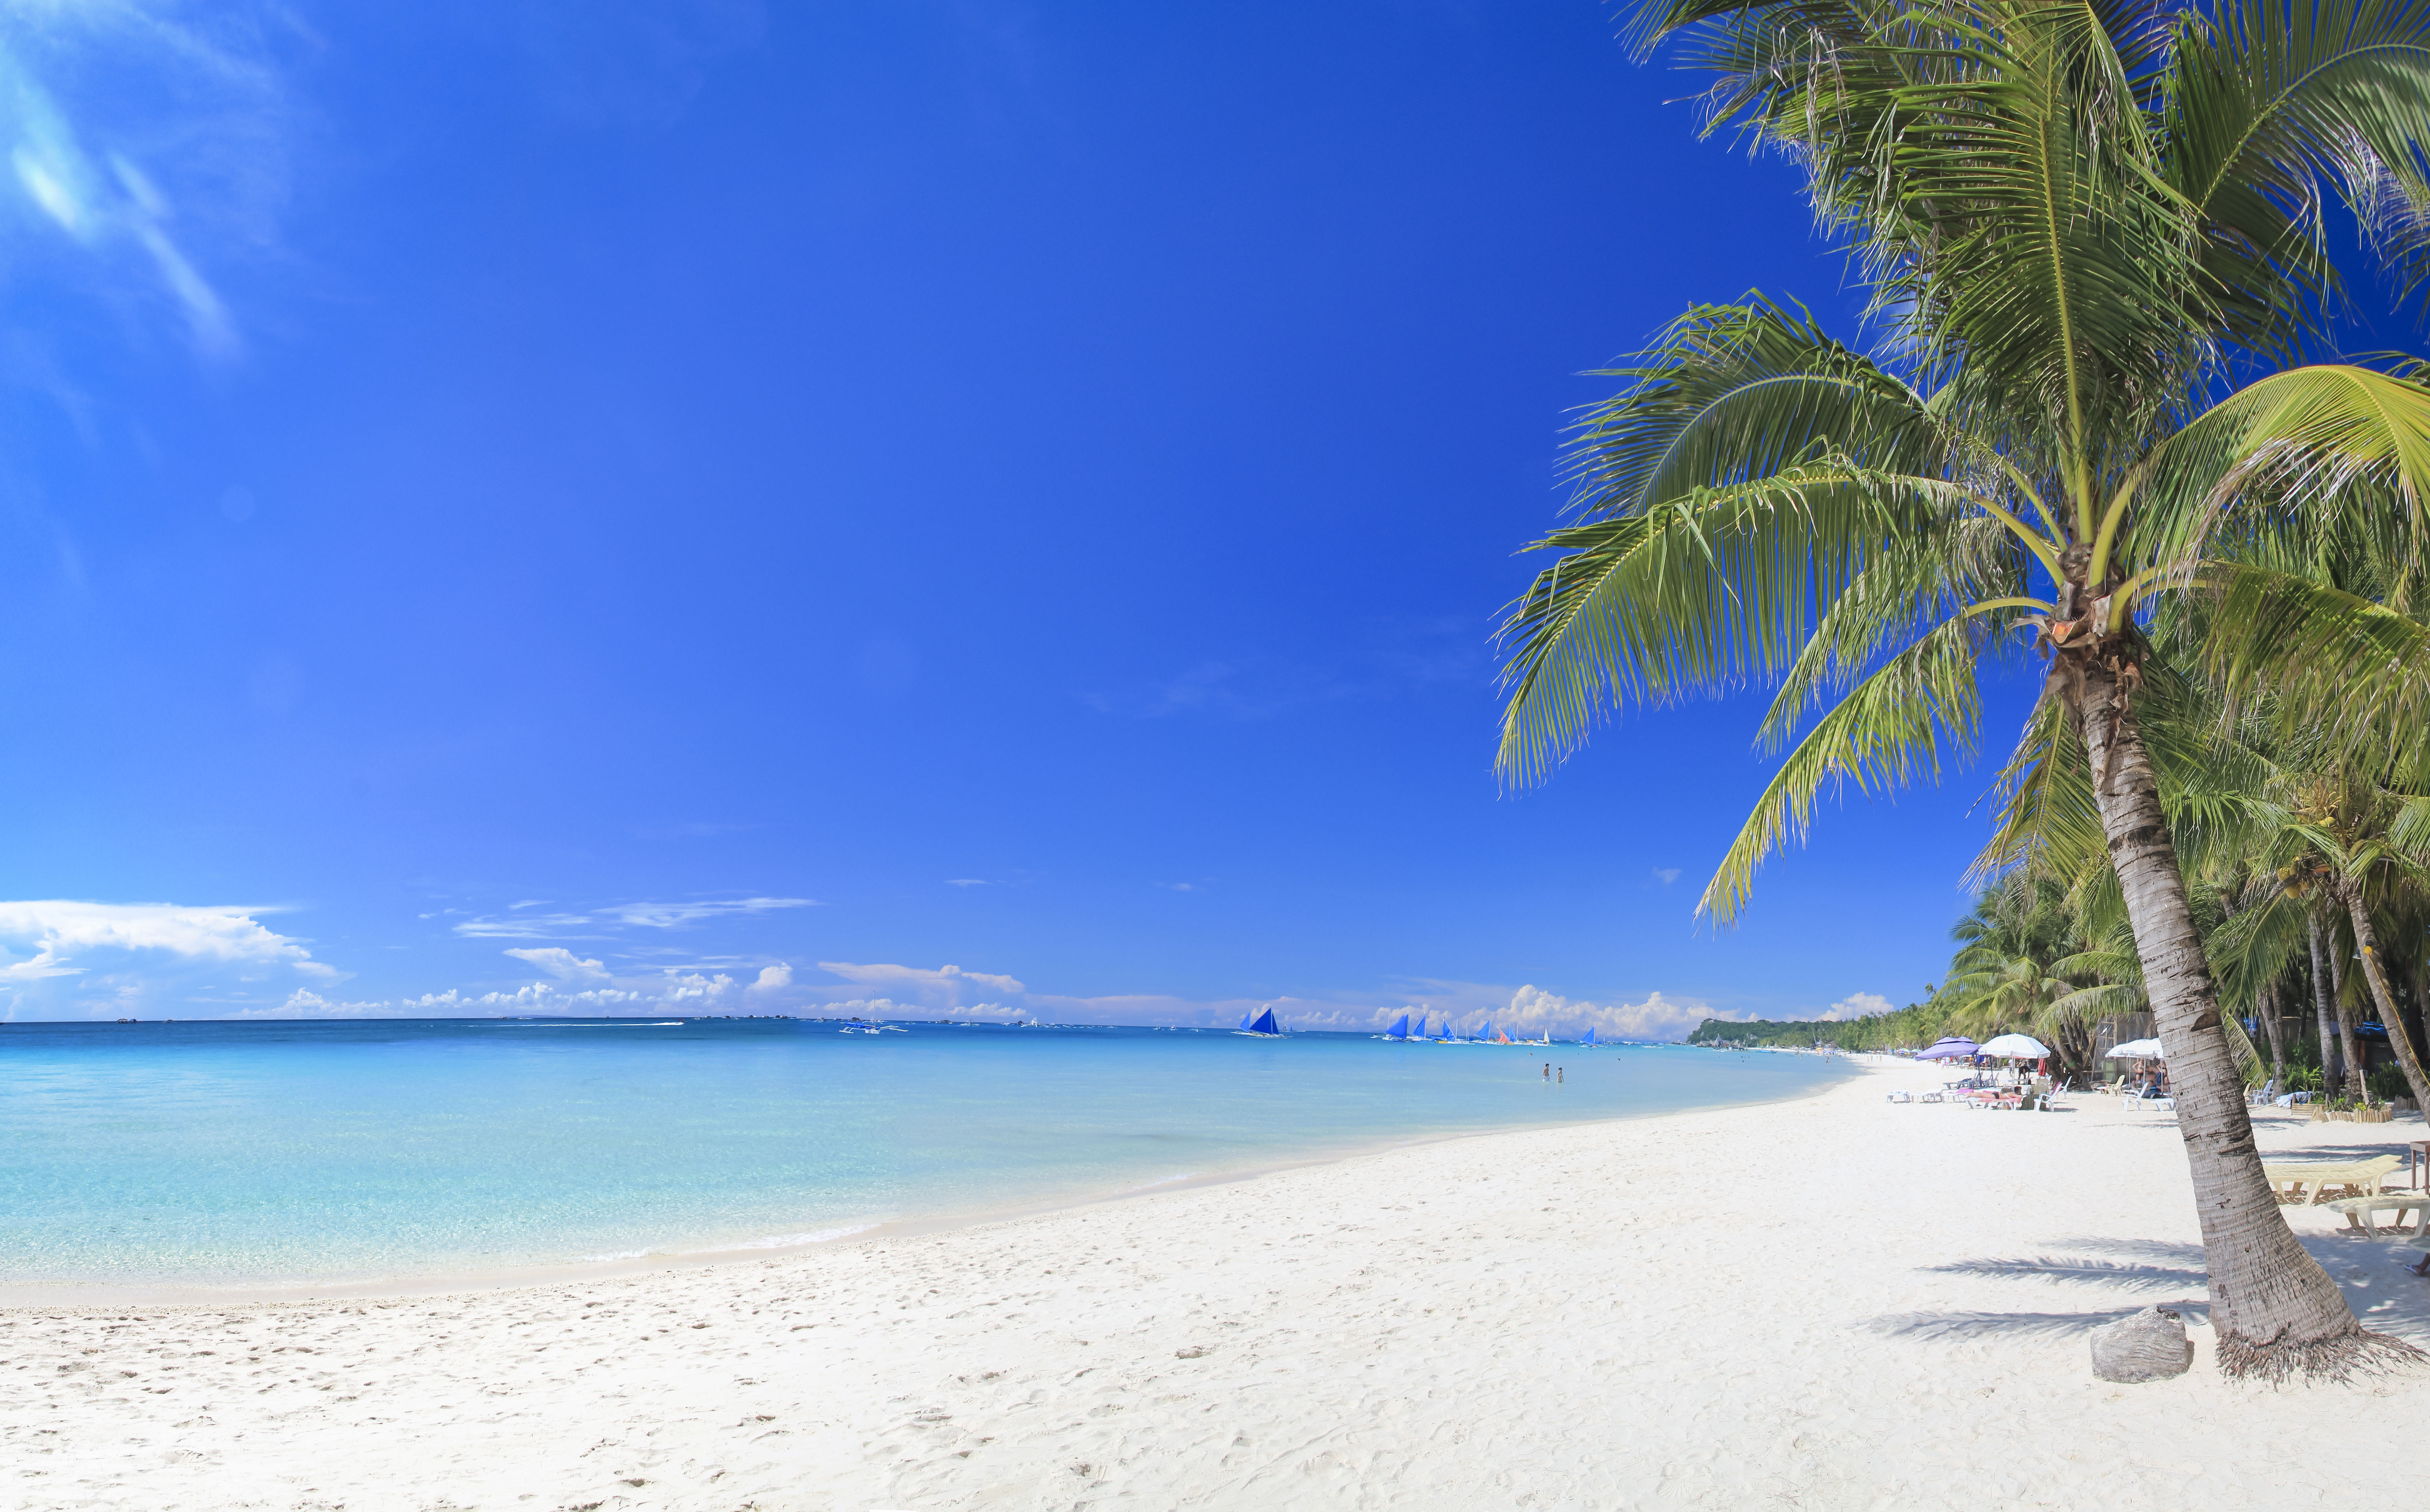 Stunning white sand beach with palm trees and crystal clear blue waters in Boracay, Philippines. 